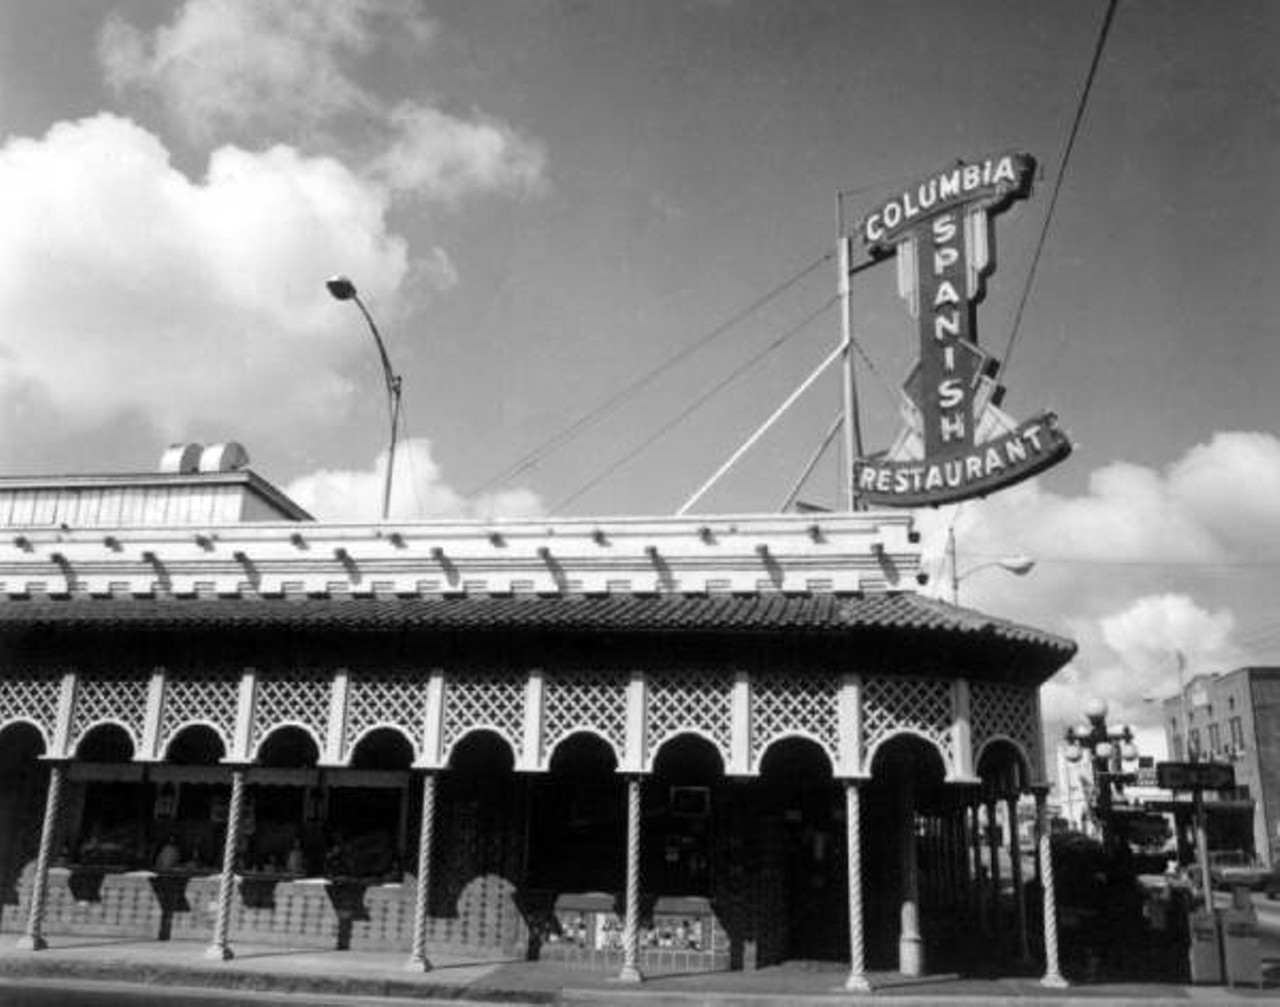 Columbia Restaurant in Ybor City, published in 1973